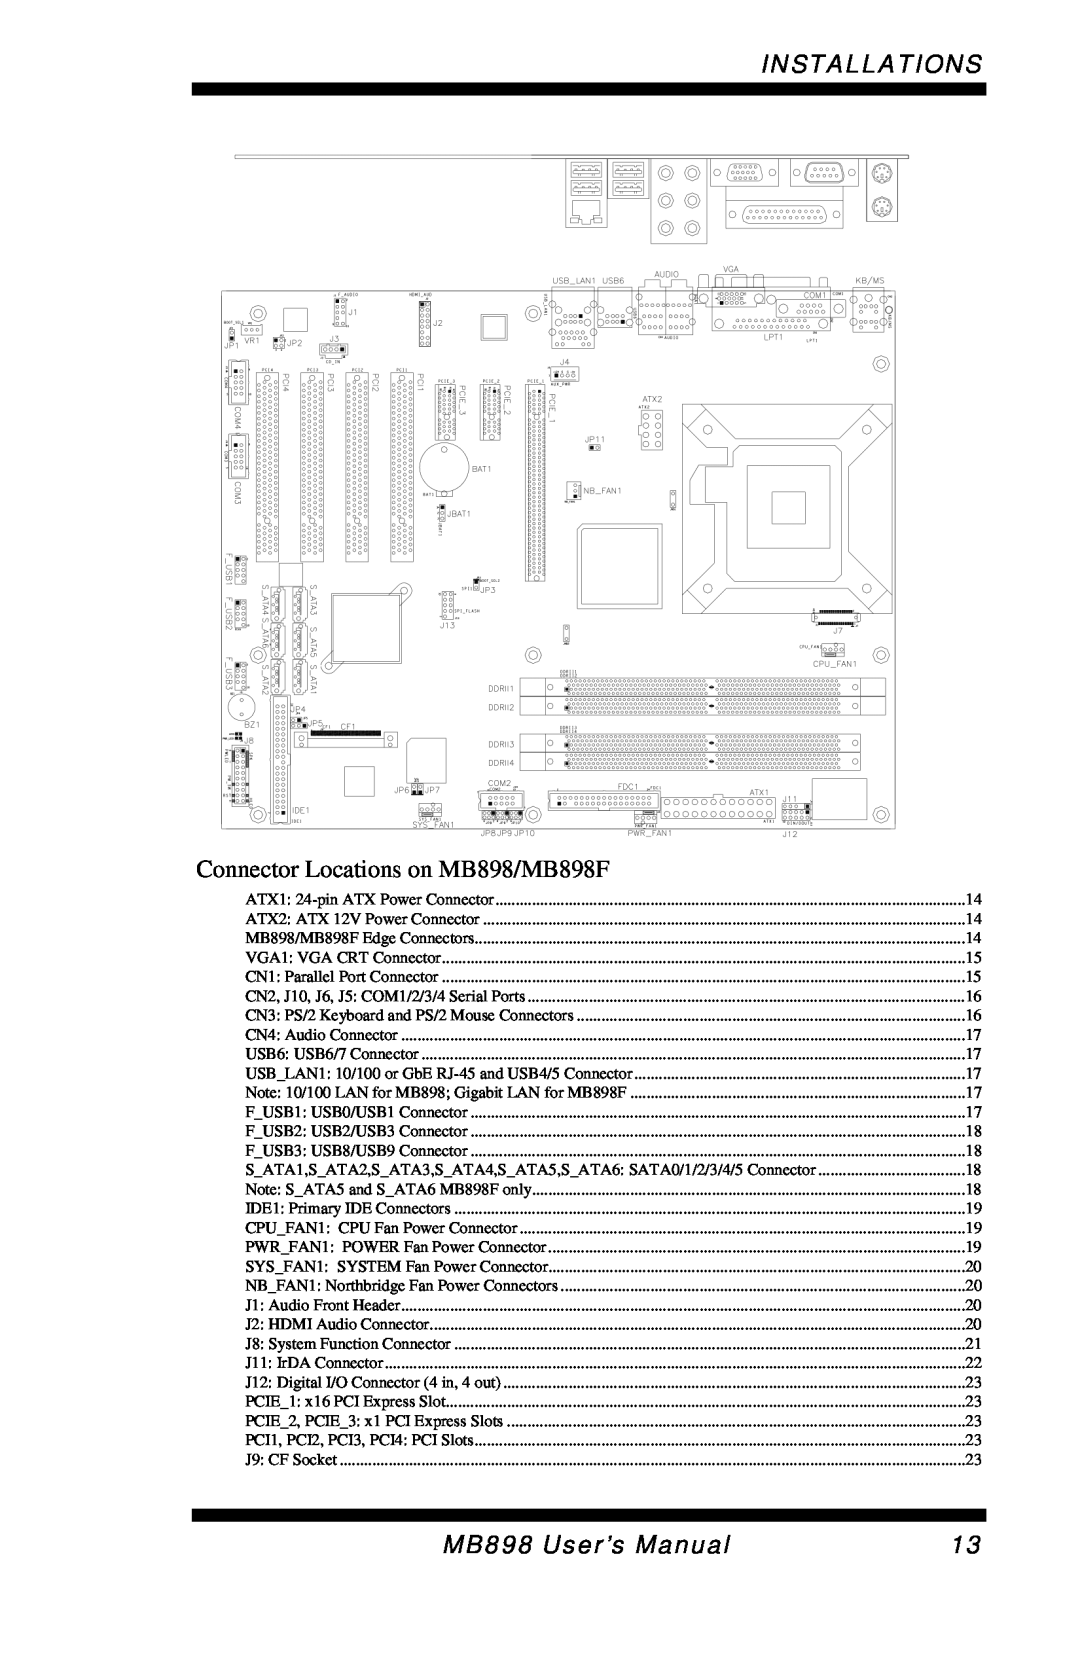 Intel MB898RF user manual Installations, Connector Locations on MB898/MB898F, MB898 User’s Manual 